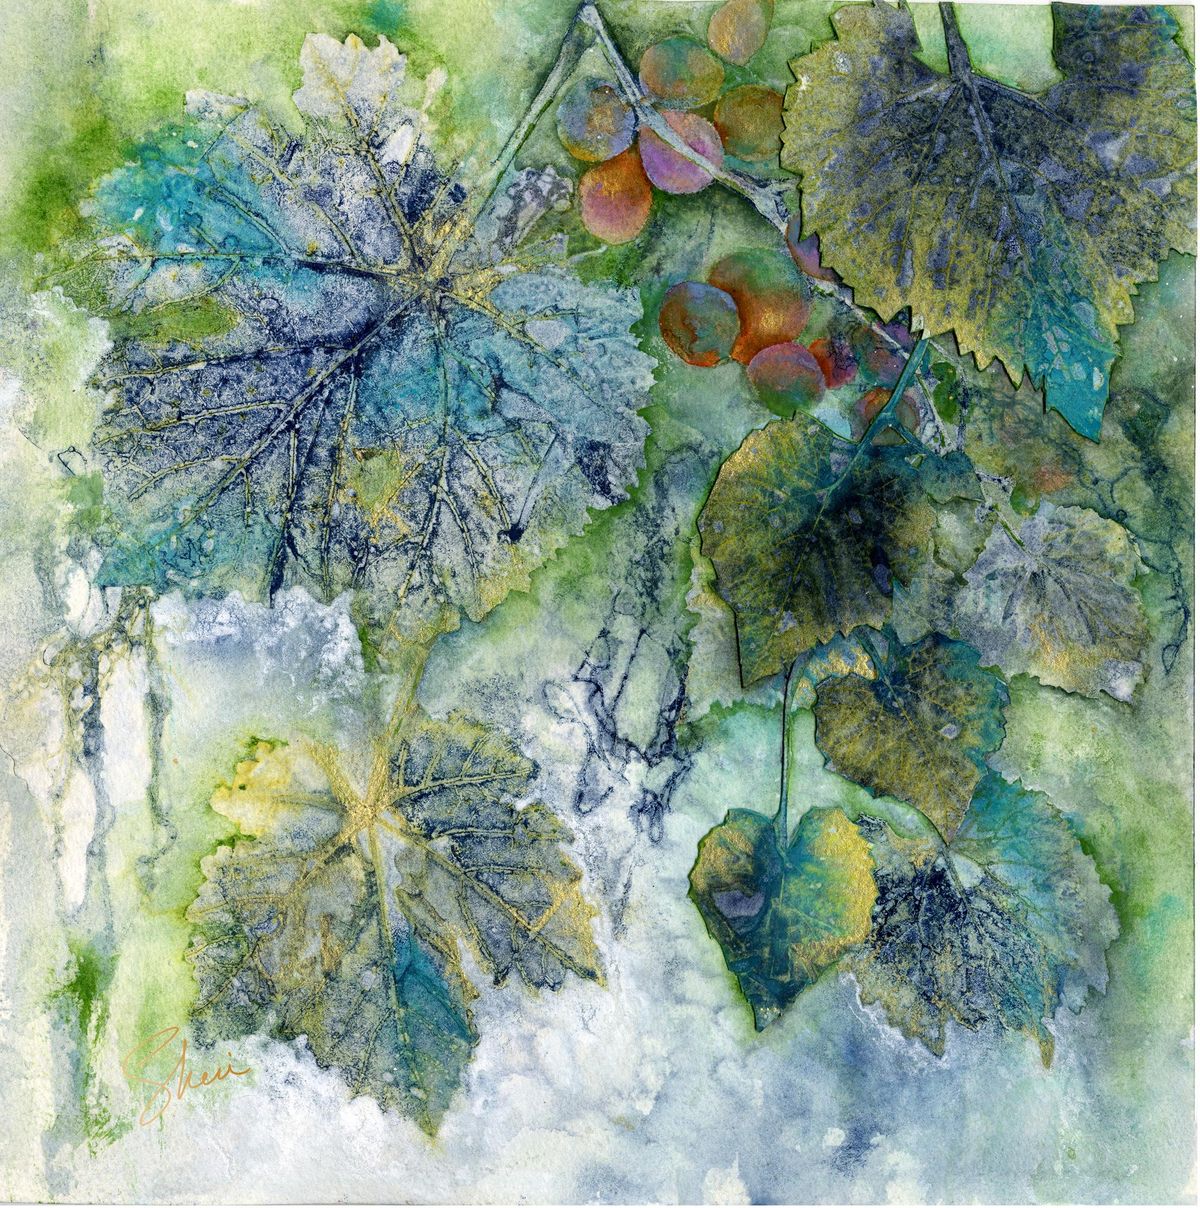 “Grapes for the Deer” by Sheri Trepina (watercolor collage) is featured at Dodson’s Jewelers in October. (DODSONS JEWELERS)